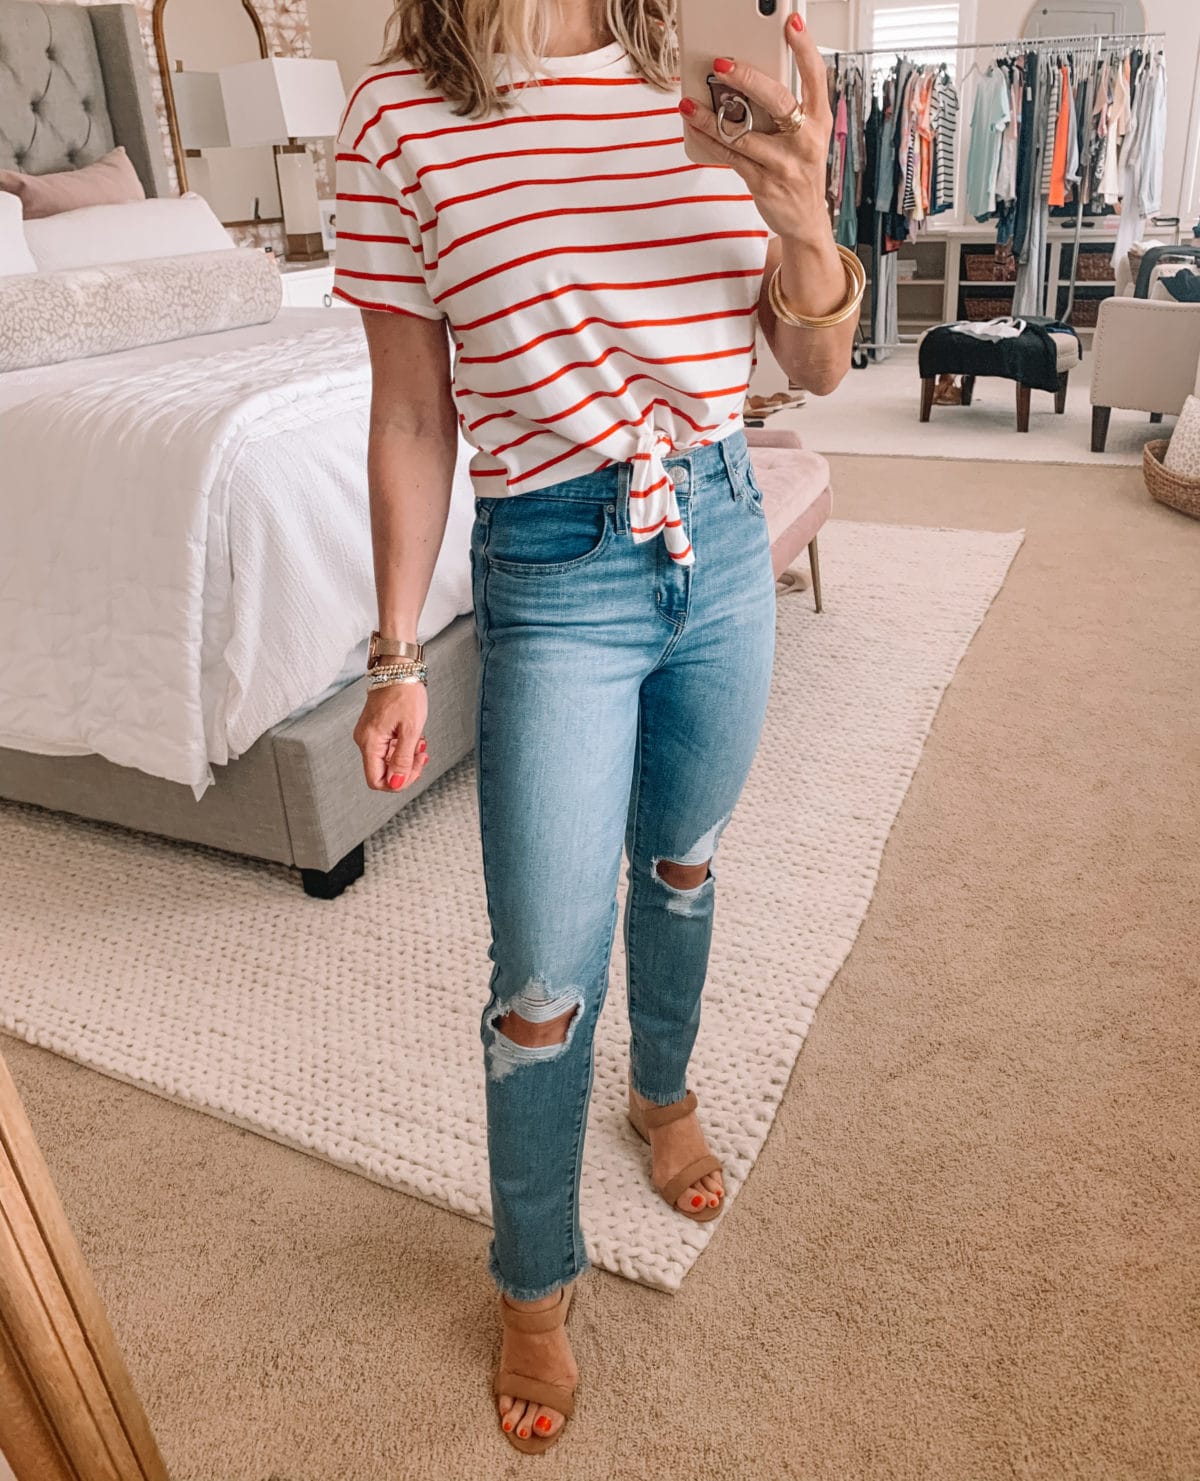 Amazon Fashion Finds, Striped Tie Front Top, Jeans, Sandals 